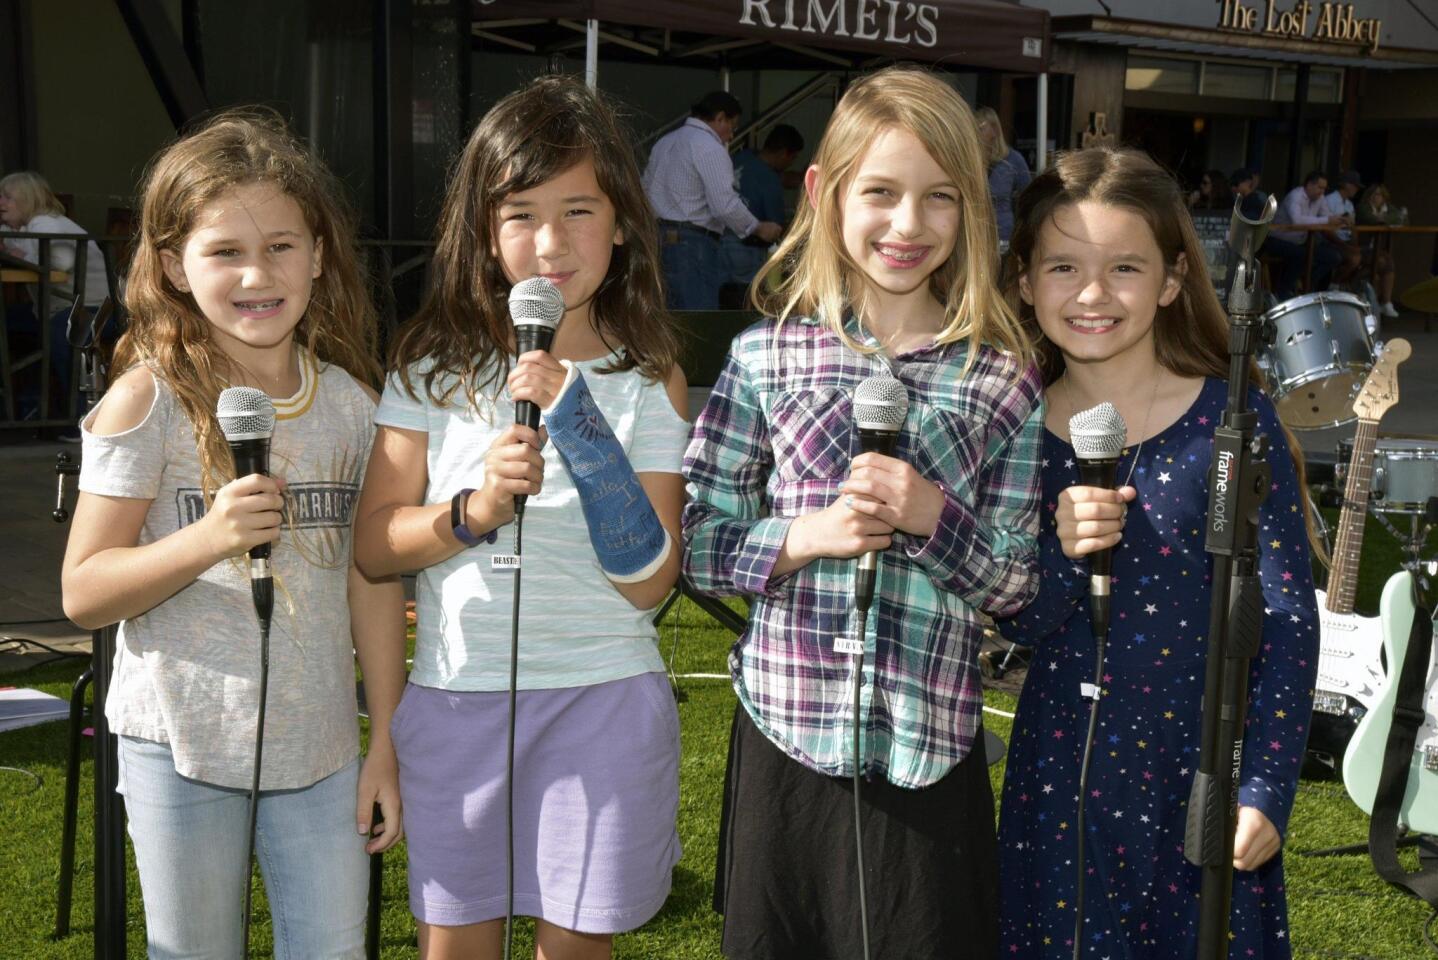 One of the music stops featured Braedyn, Taylor, Rylie, and Talia